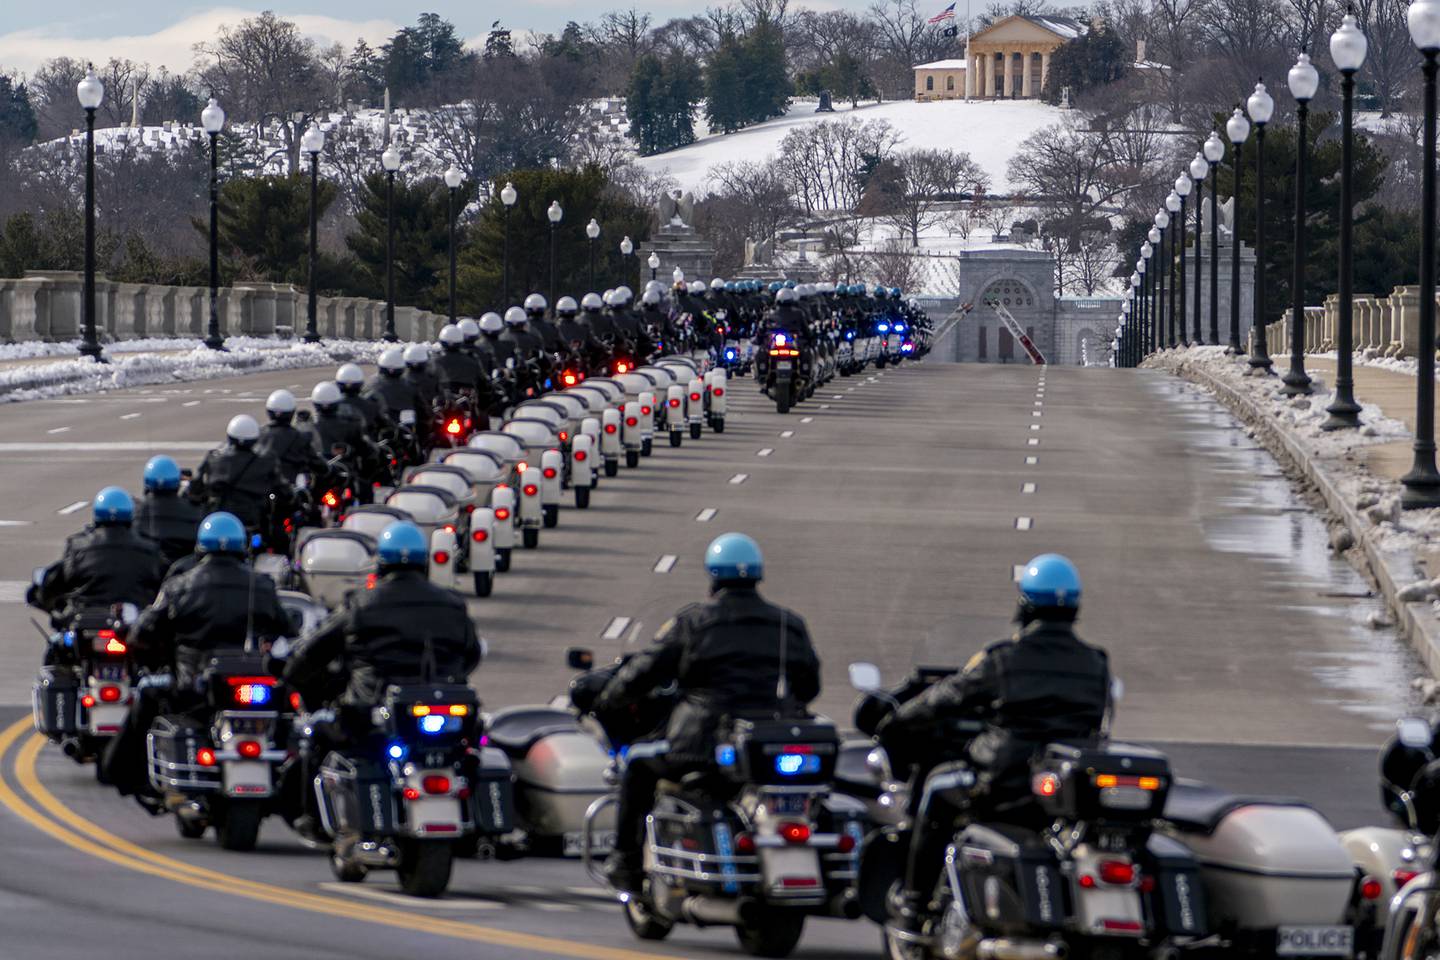 U.S. Capitol Police officers on motorcycles ride ahead of a hearse carrying the remains of U.S. Capitol Police officer Brian Sicknick as it makes its way to Arlington National Cemetery after Sicknick was lying in honor at the U.S Capitol, Wednesday, Feb. 3, 2021, in Washington.